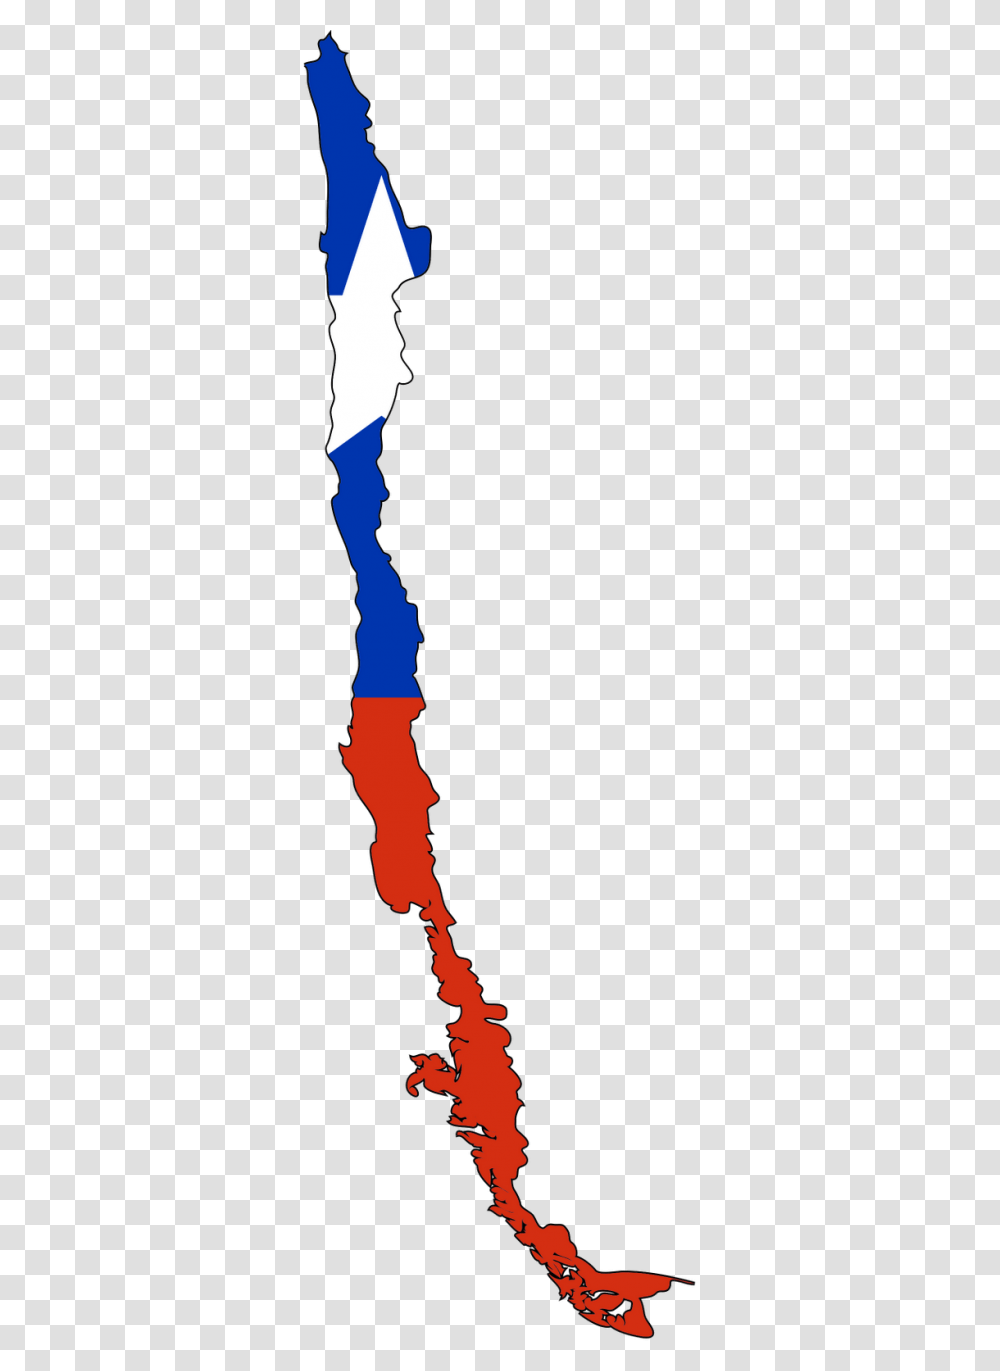 Chile Flag Clipart Hd Chile Map, Person, Outdoors, Shoreline, Water Transparent Png